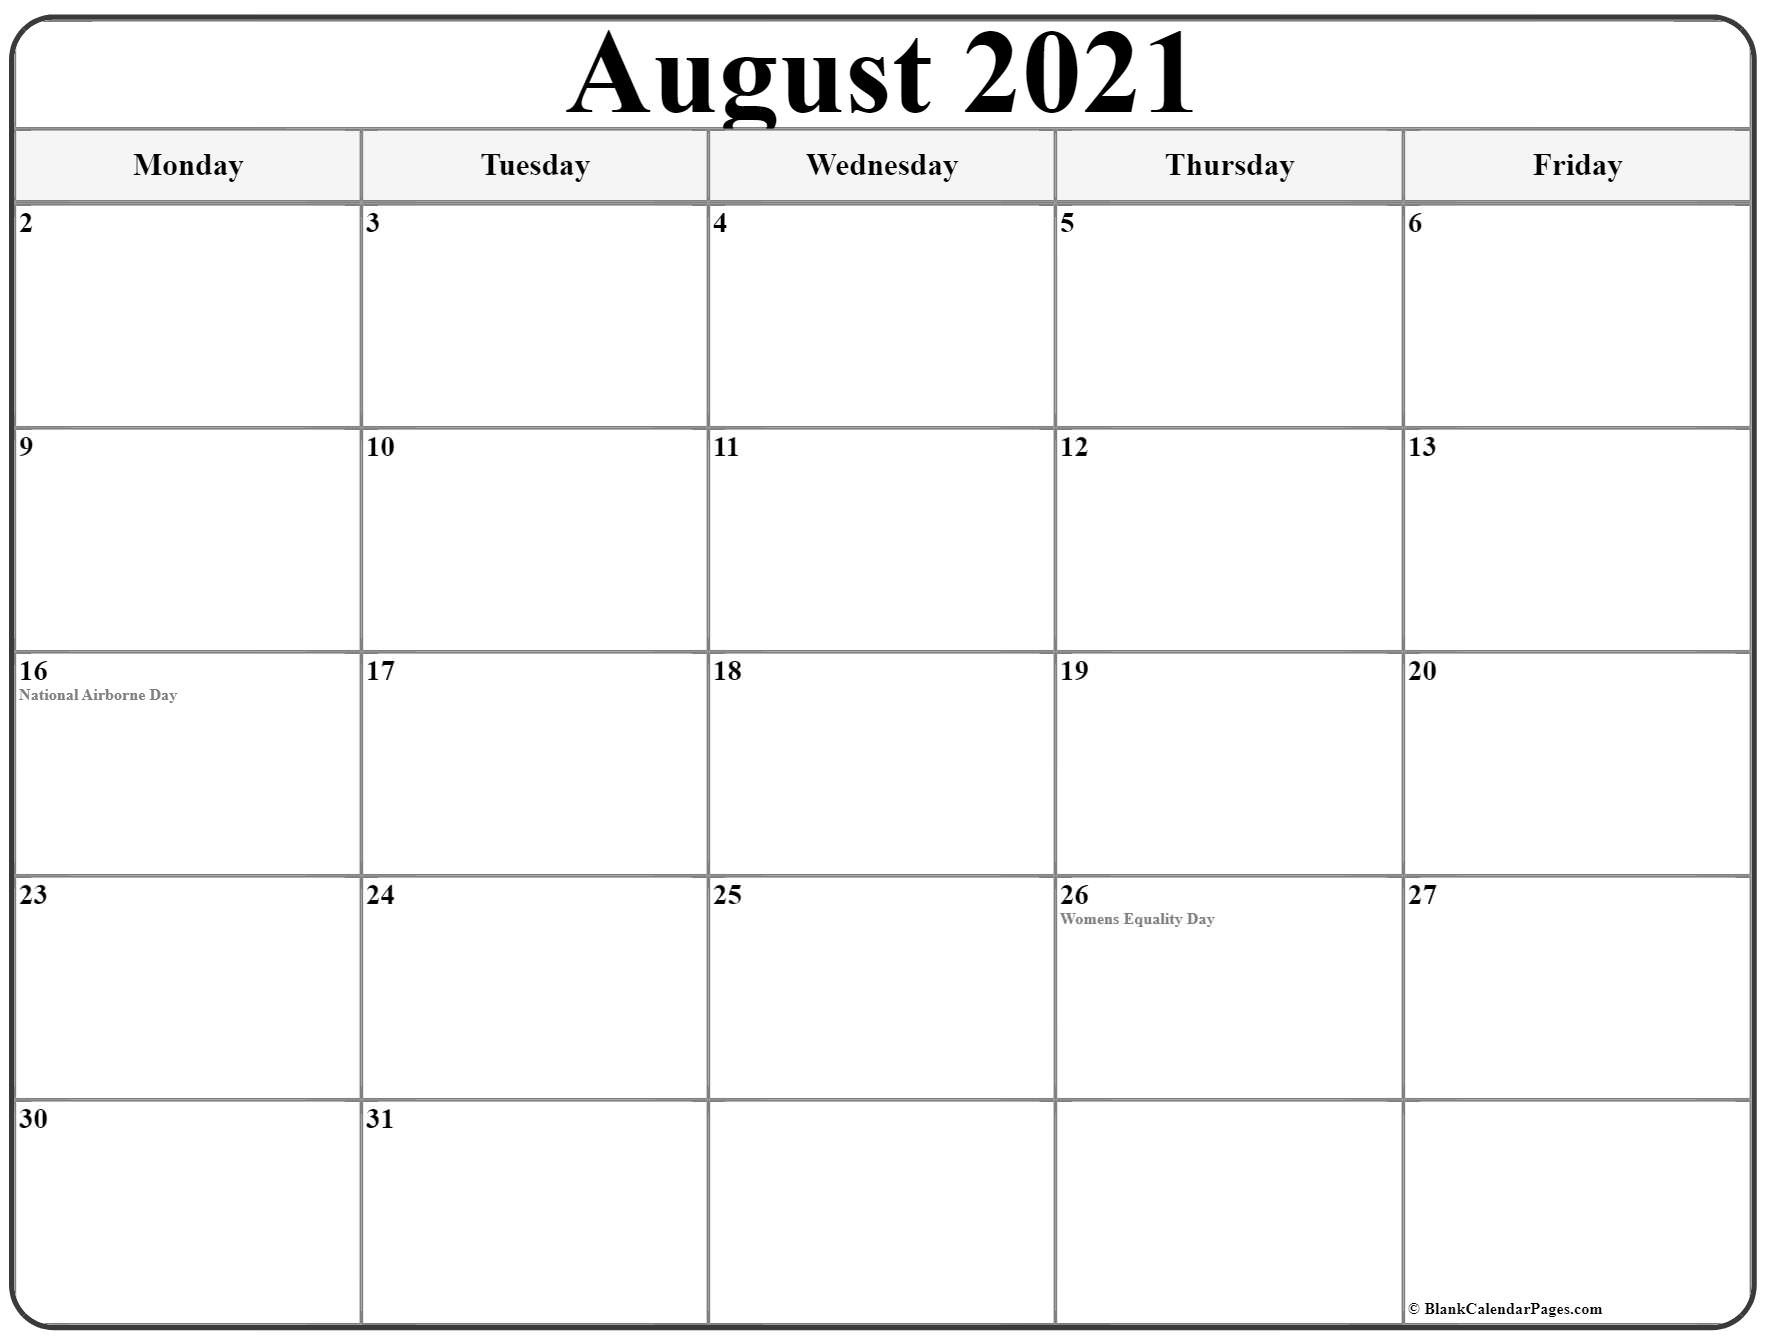 August 2021 Monday Calendar | Monday To Sunday-Monday-Friday August 2021